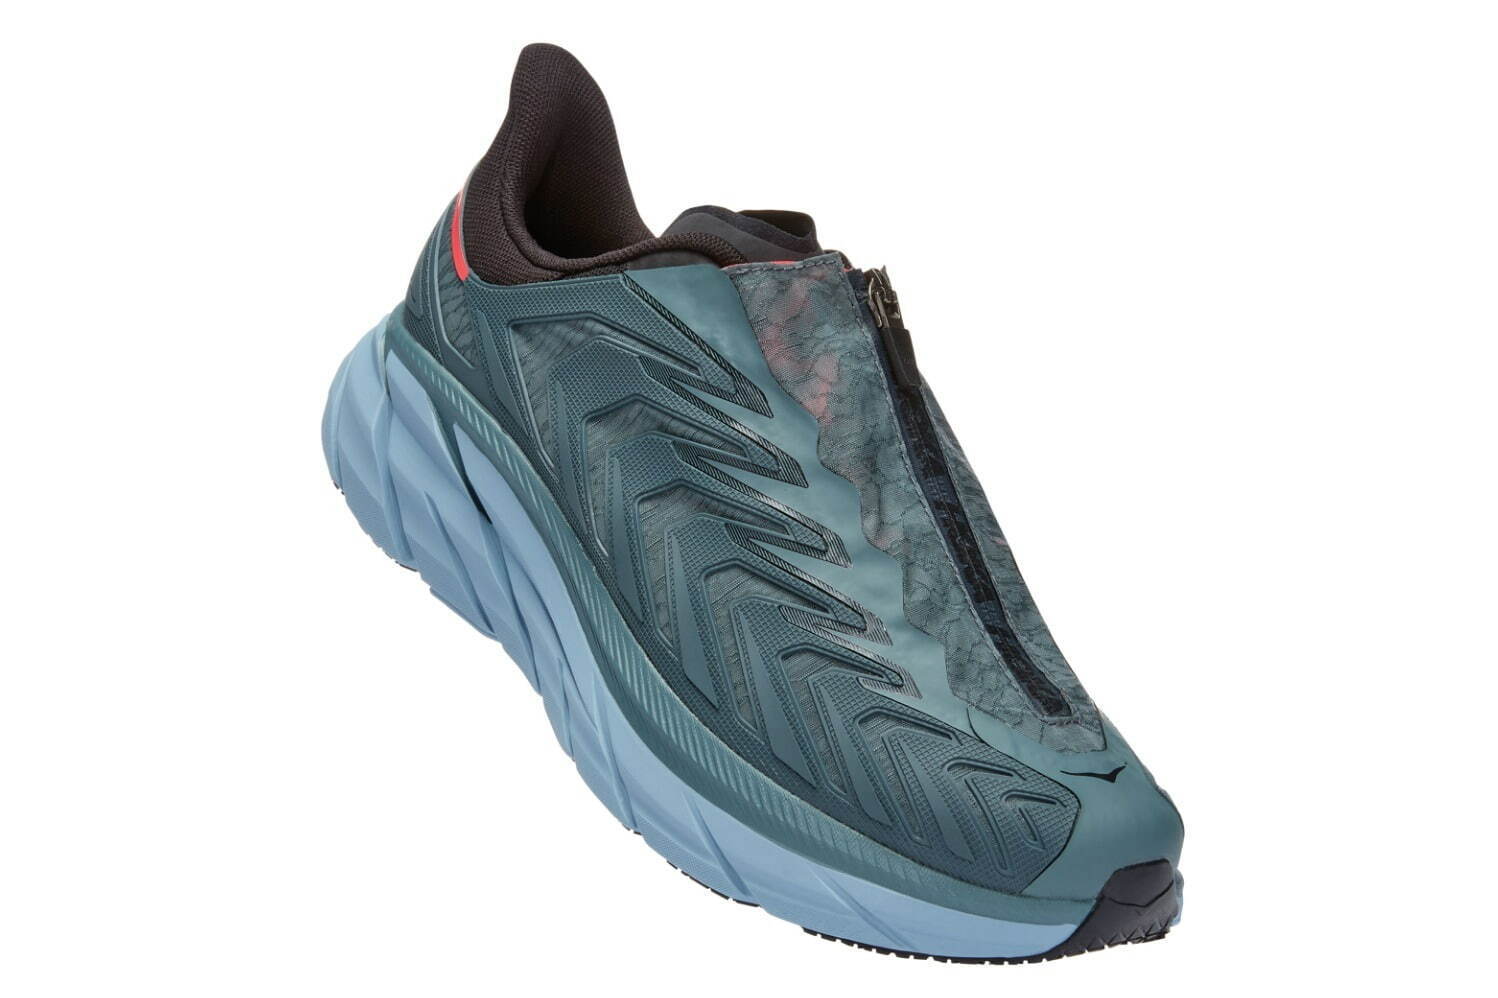 HOKA ONE ONE 新鞋款「Project Clifton」发布在即